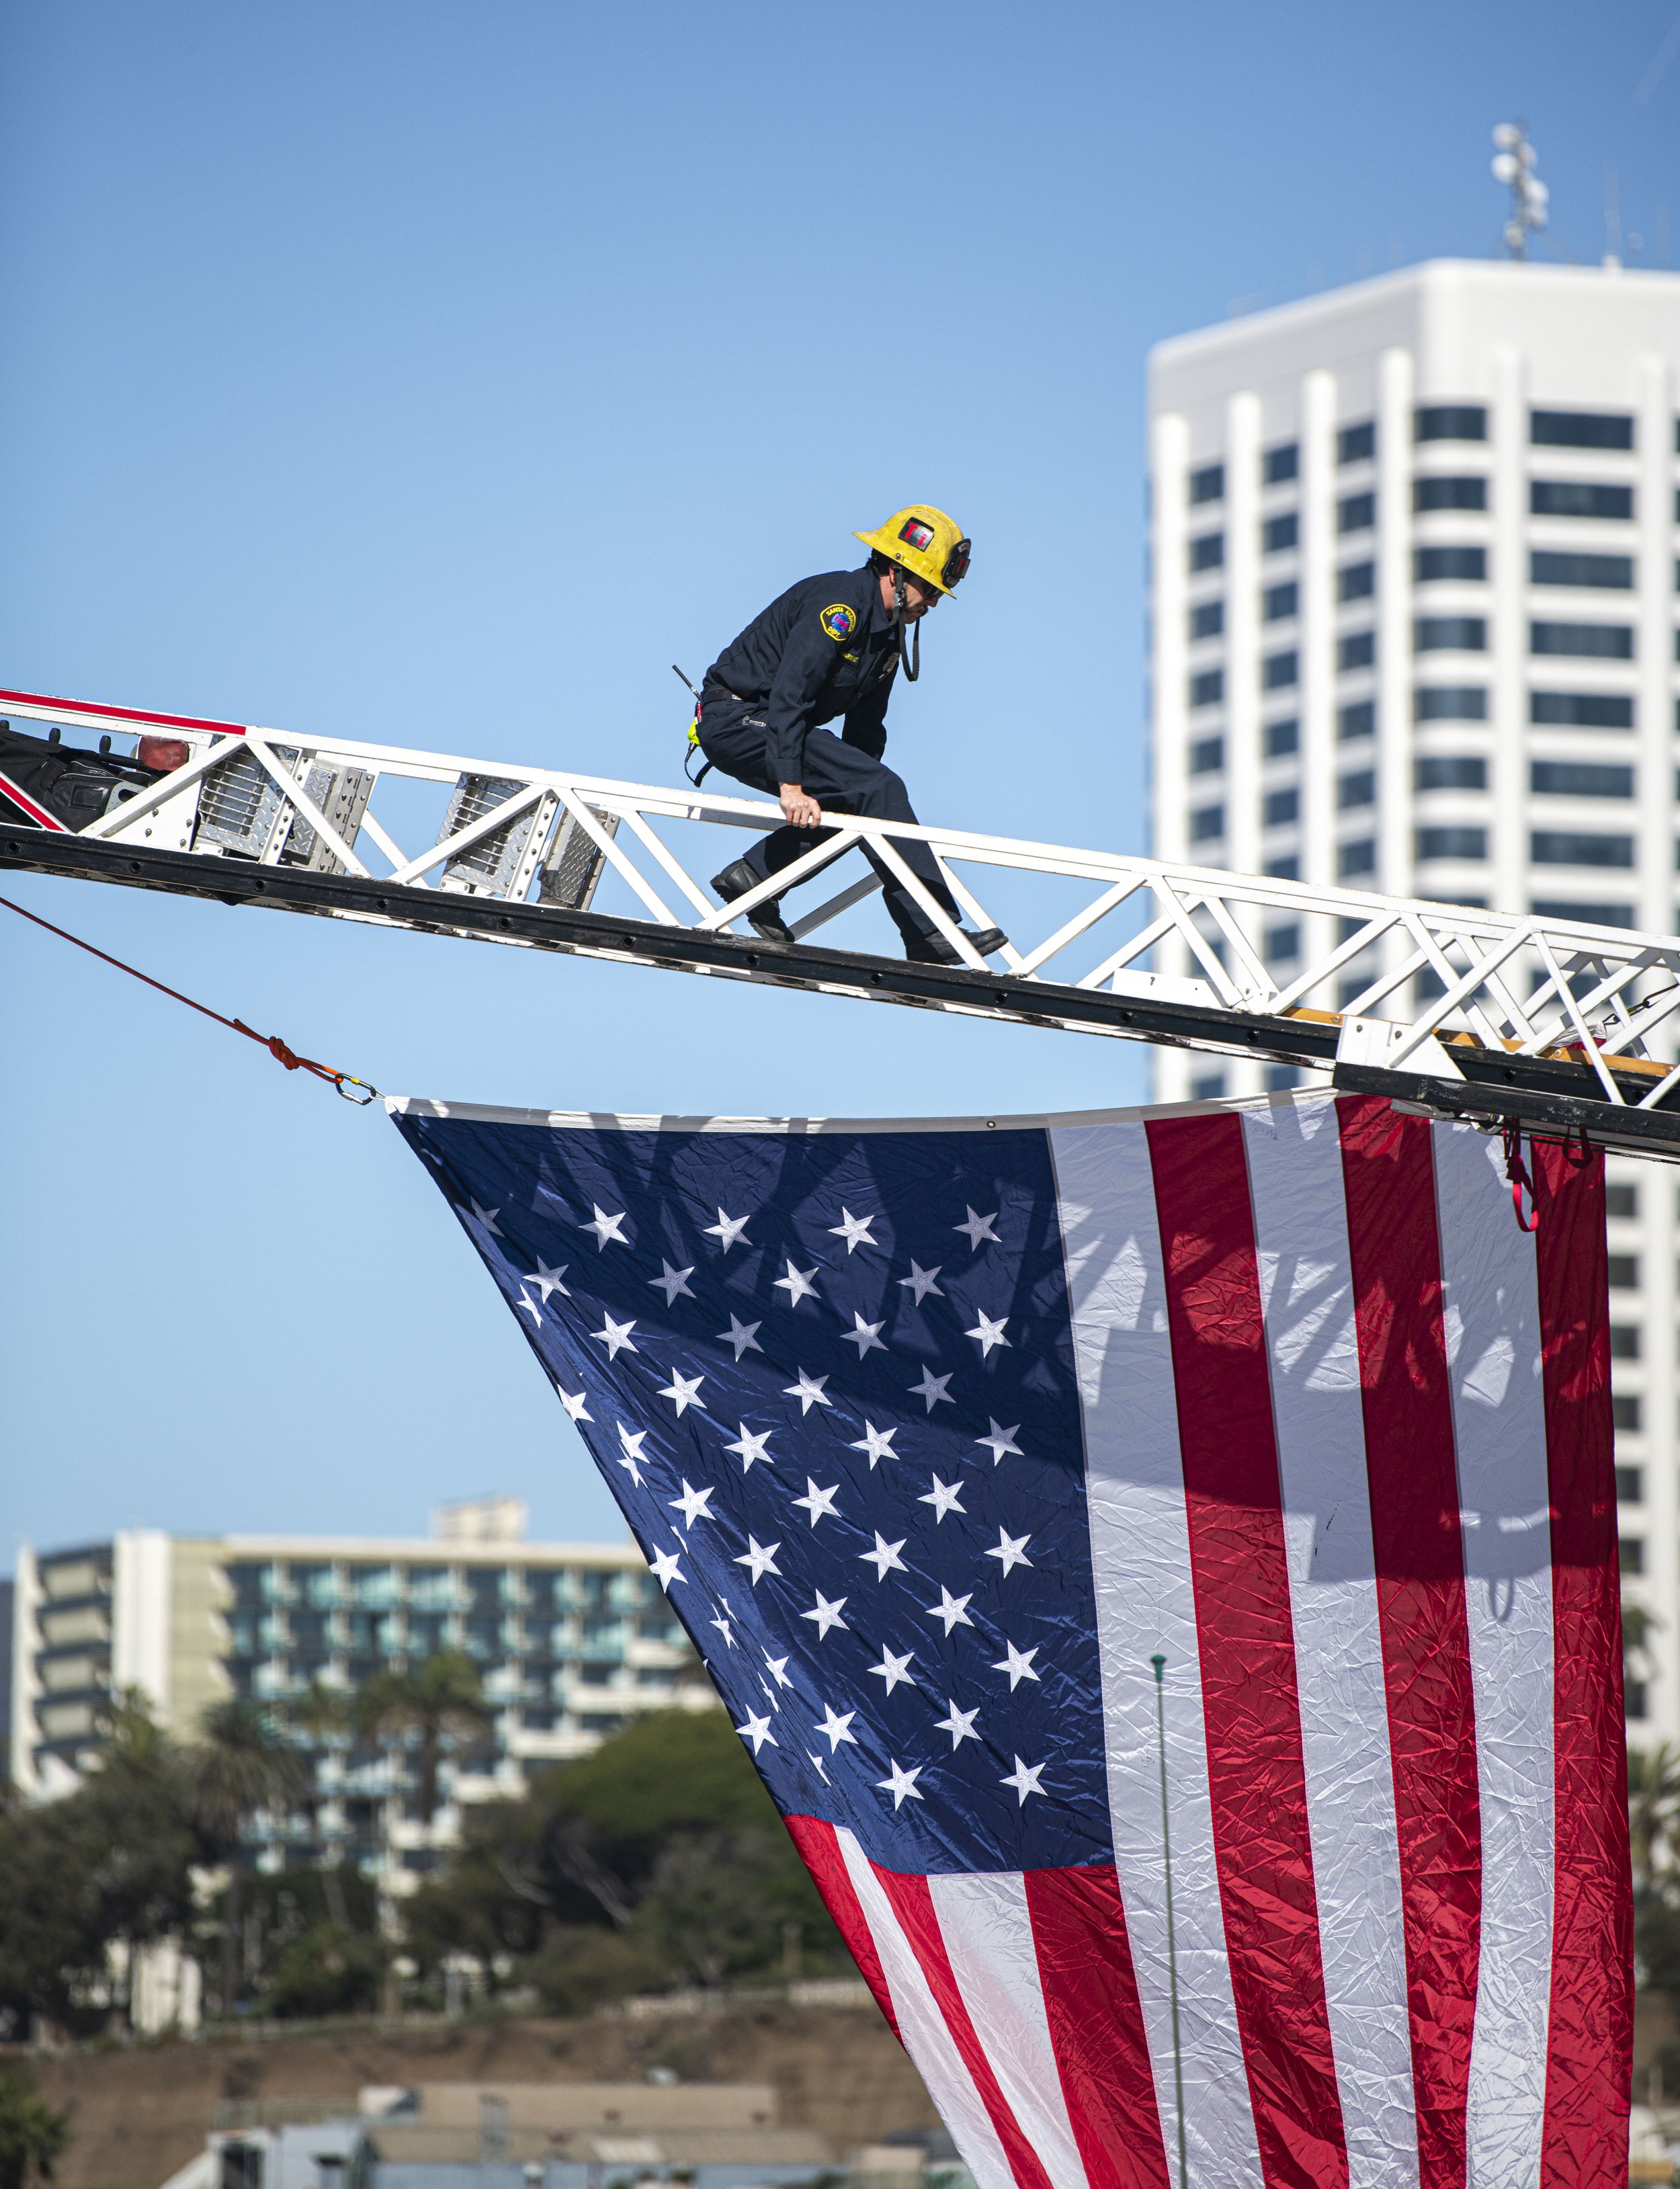  A Santa Monica Firefighter runs down the fire ladder on the firetruck after assemble the enlarged American flag for the Veterans Day event hosted by both the Los Angeles Army Recruitment Battalion and the California Army National Gaurd on Nov. 11, 2